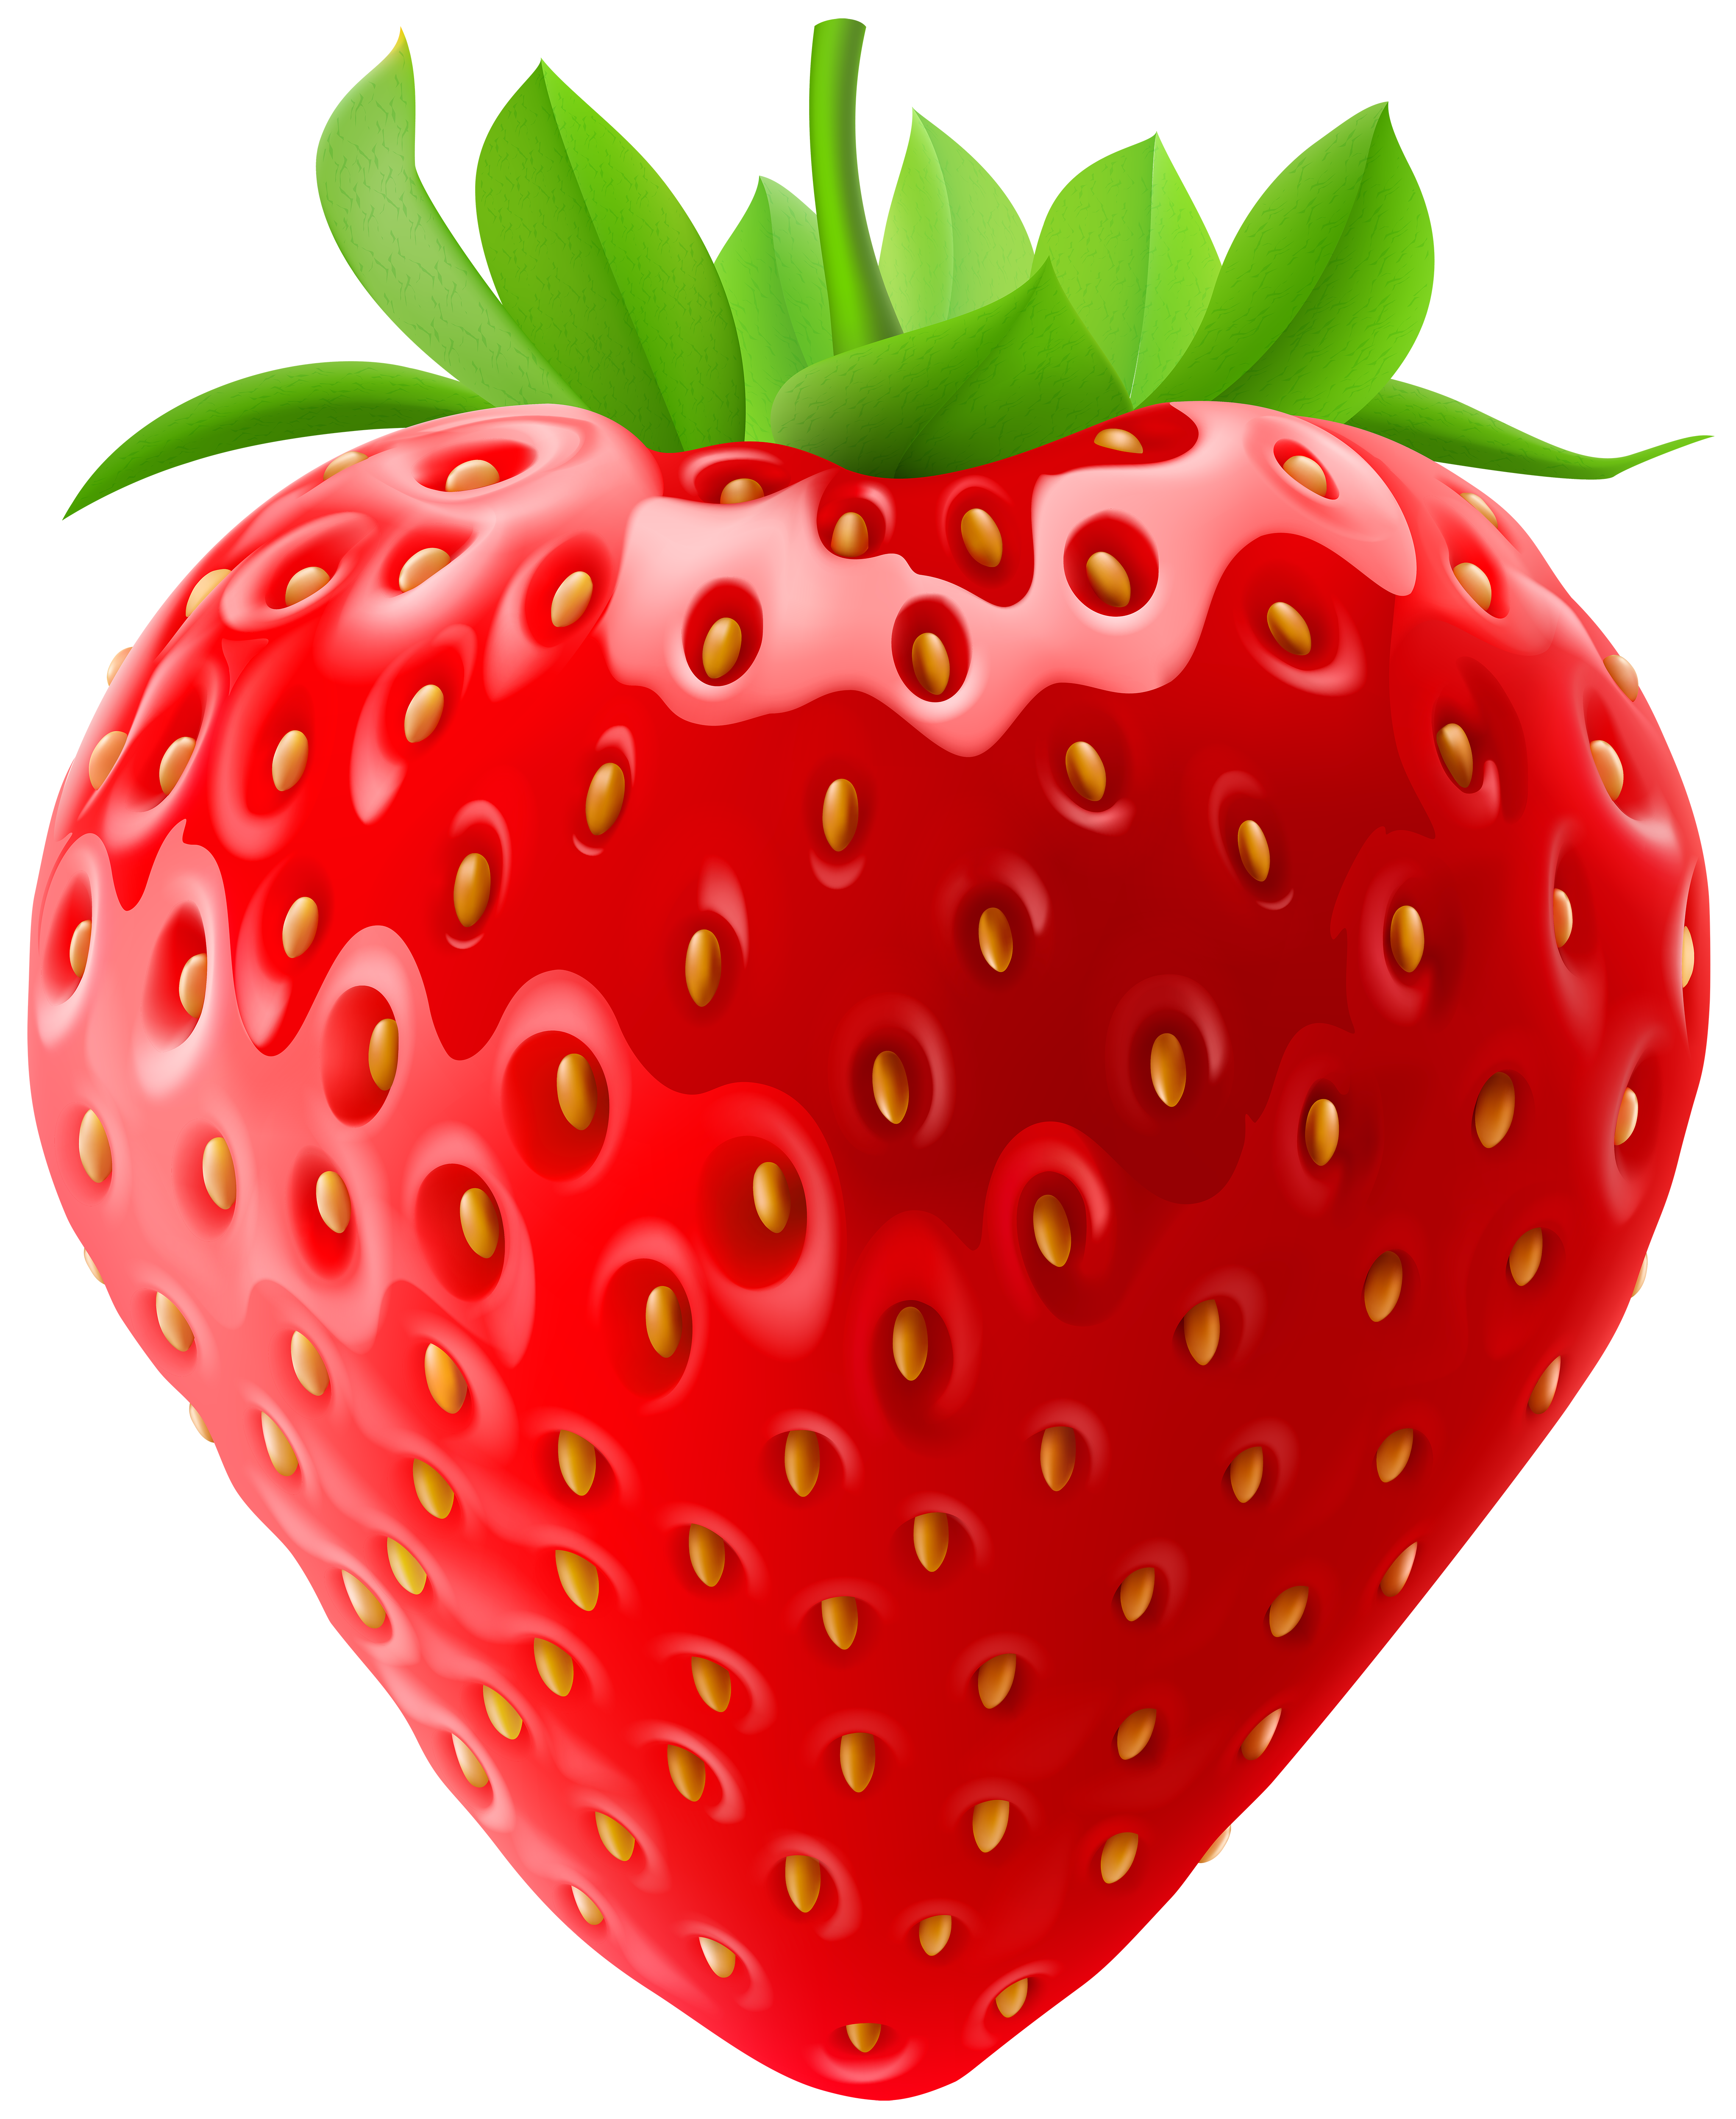 Clip art png image. Fruit clipart strawberry